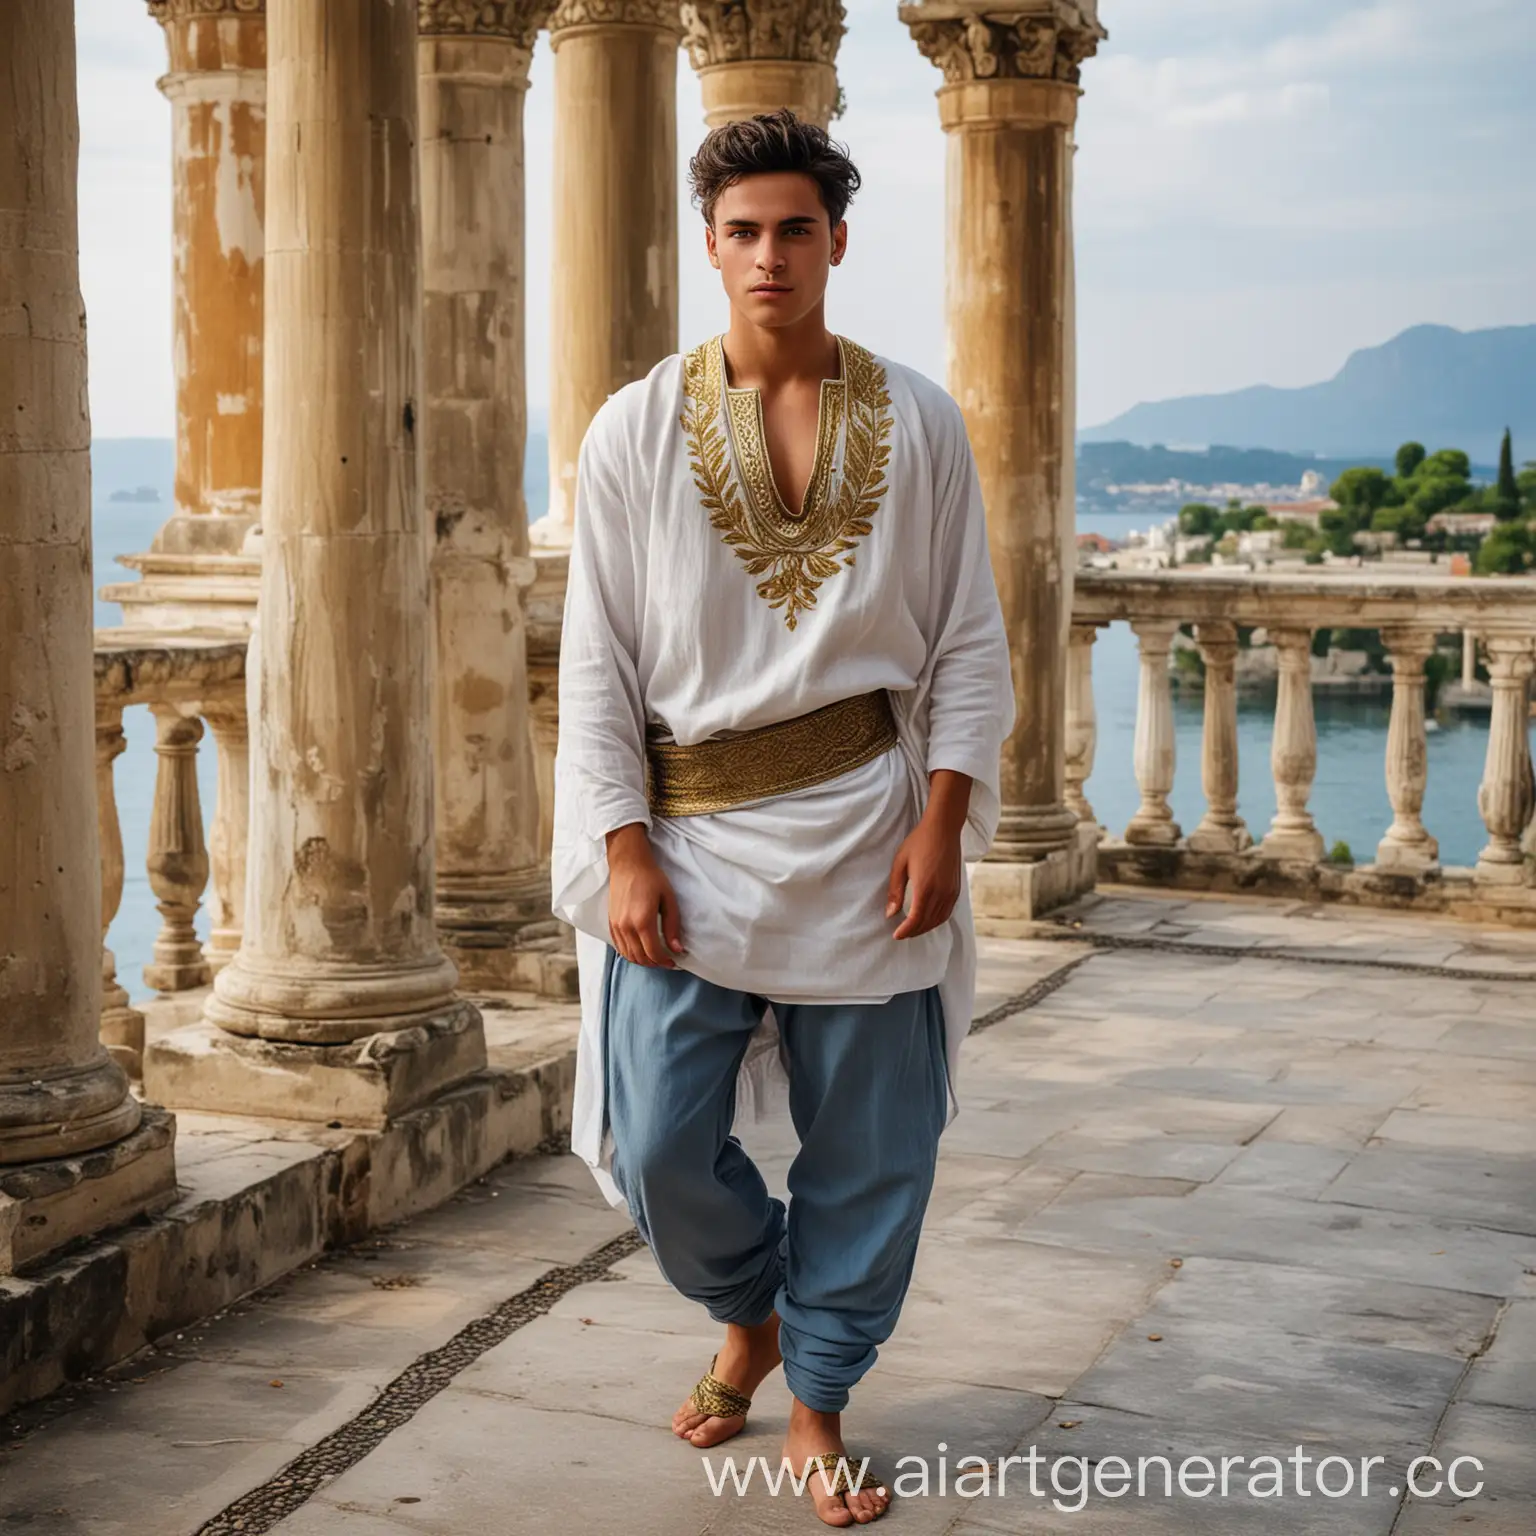 Majestic-Young-Man-with-DualColored-Eyes-and-Golden-Laurels-at-Seaside-Palace-Terrace